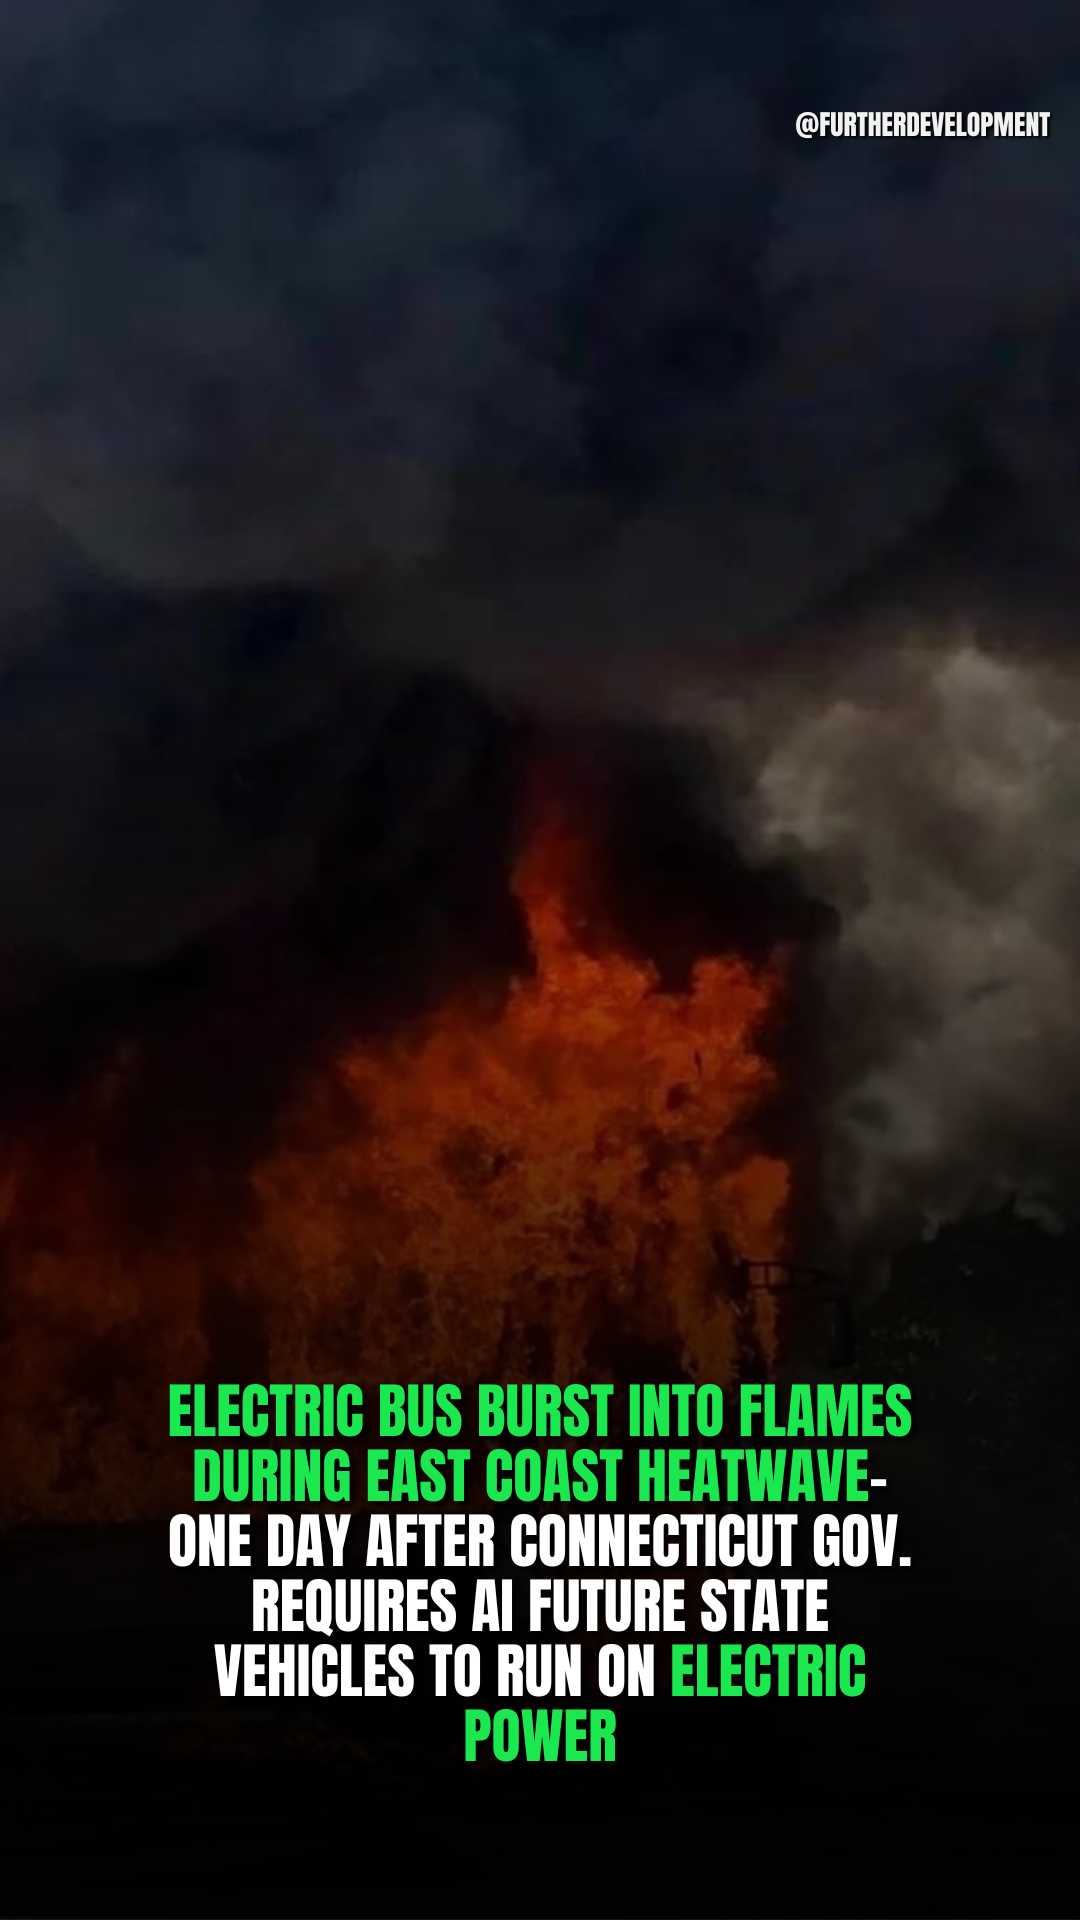 Electric Bus Burst Into Flames During East Coast Heatwave-One Day After Connecticut GoV. Requires AI Future State Vehicles to Run On Electric Power